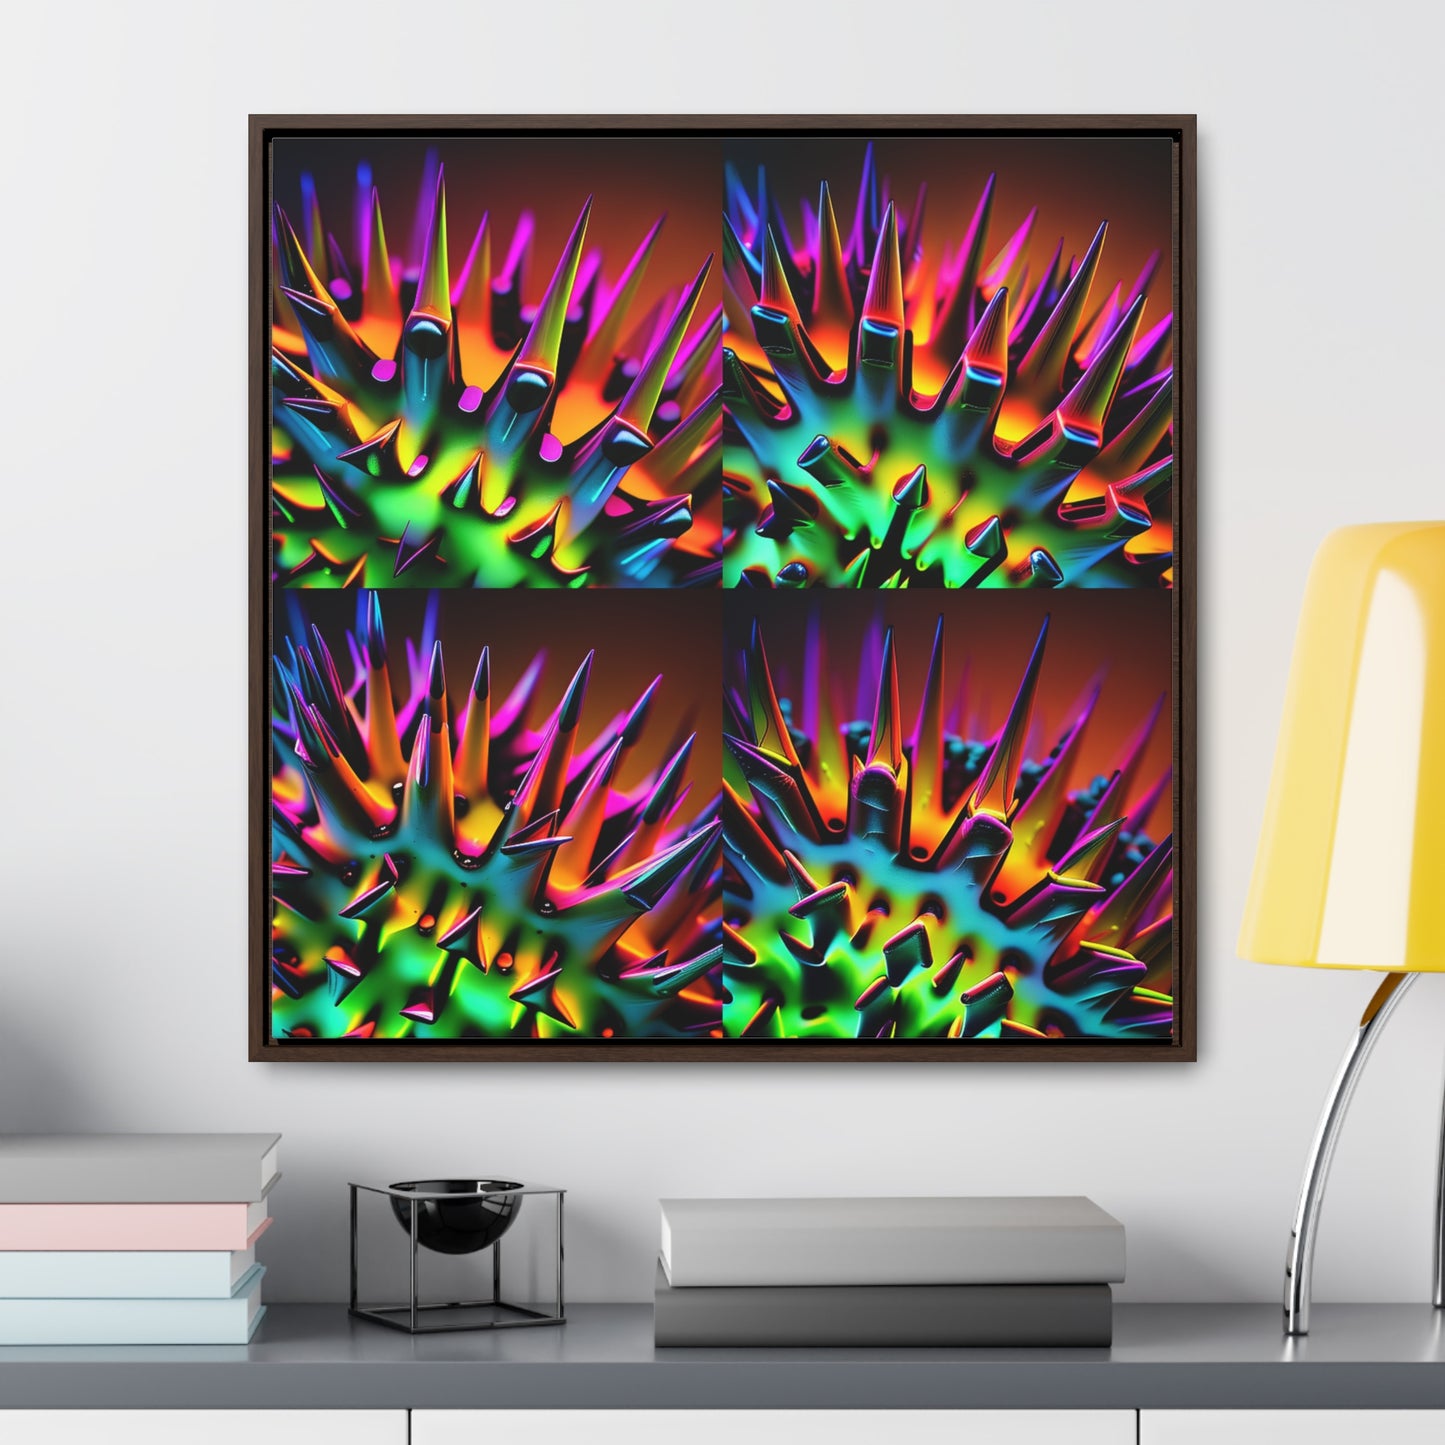 Gallery Canvas Wraps, Square Frame Macro Neon Spike